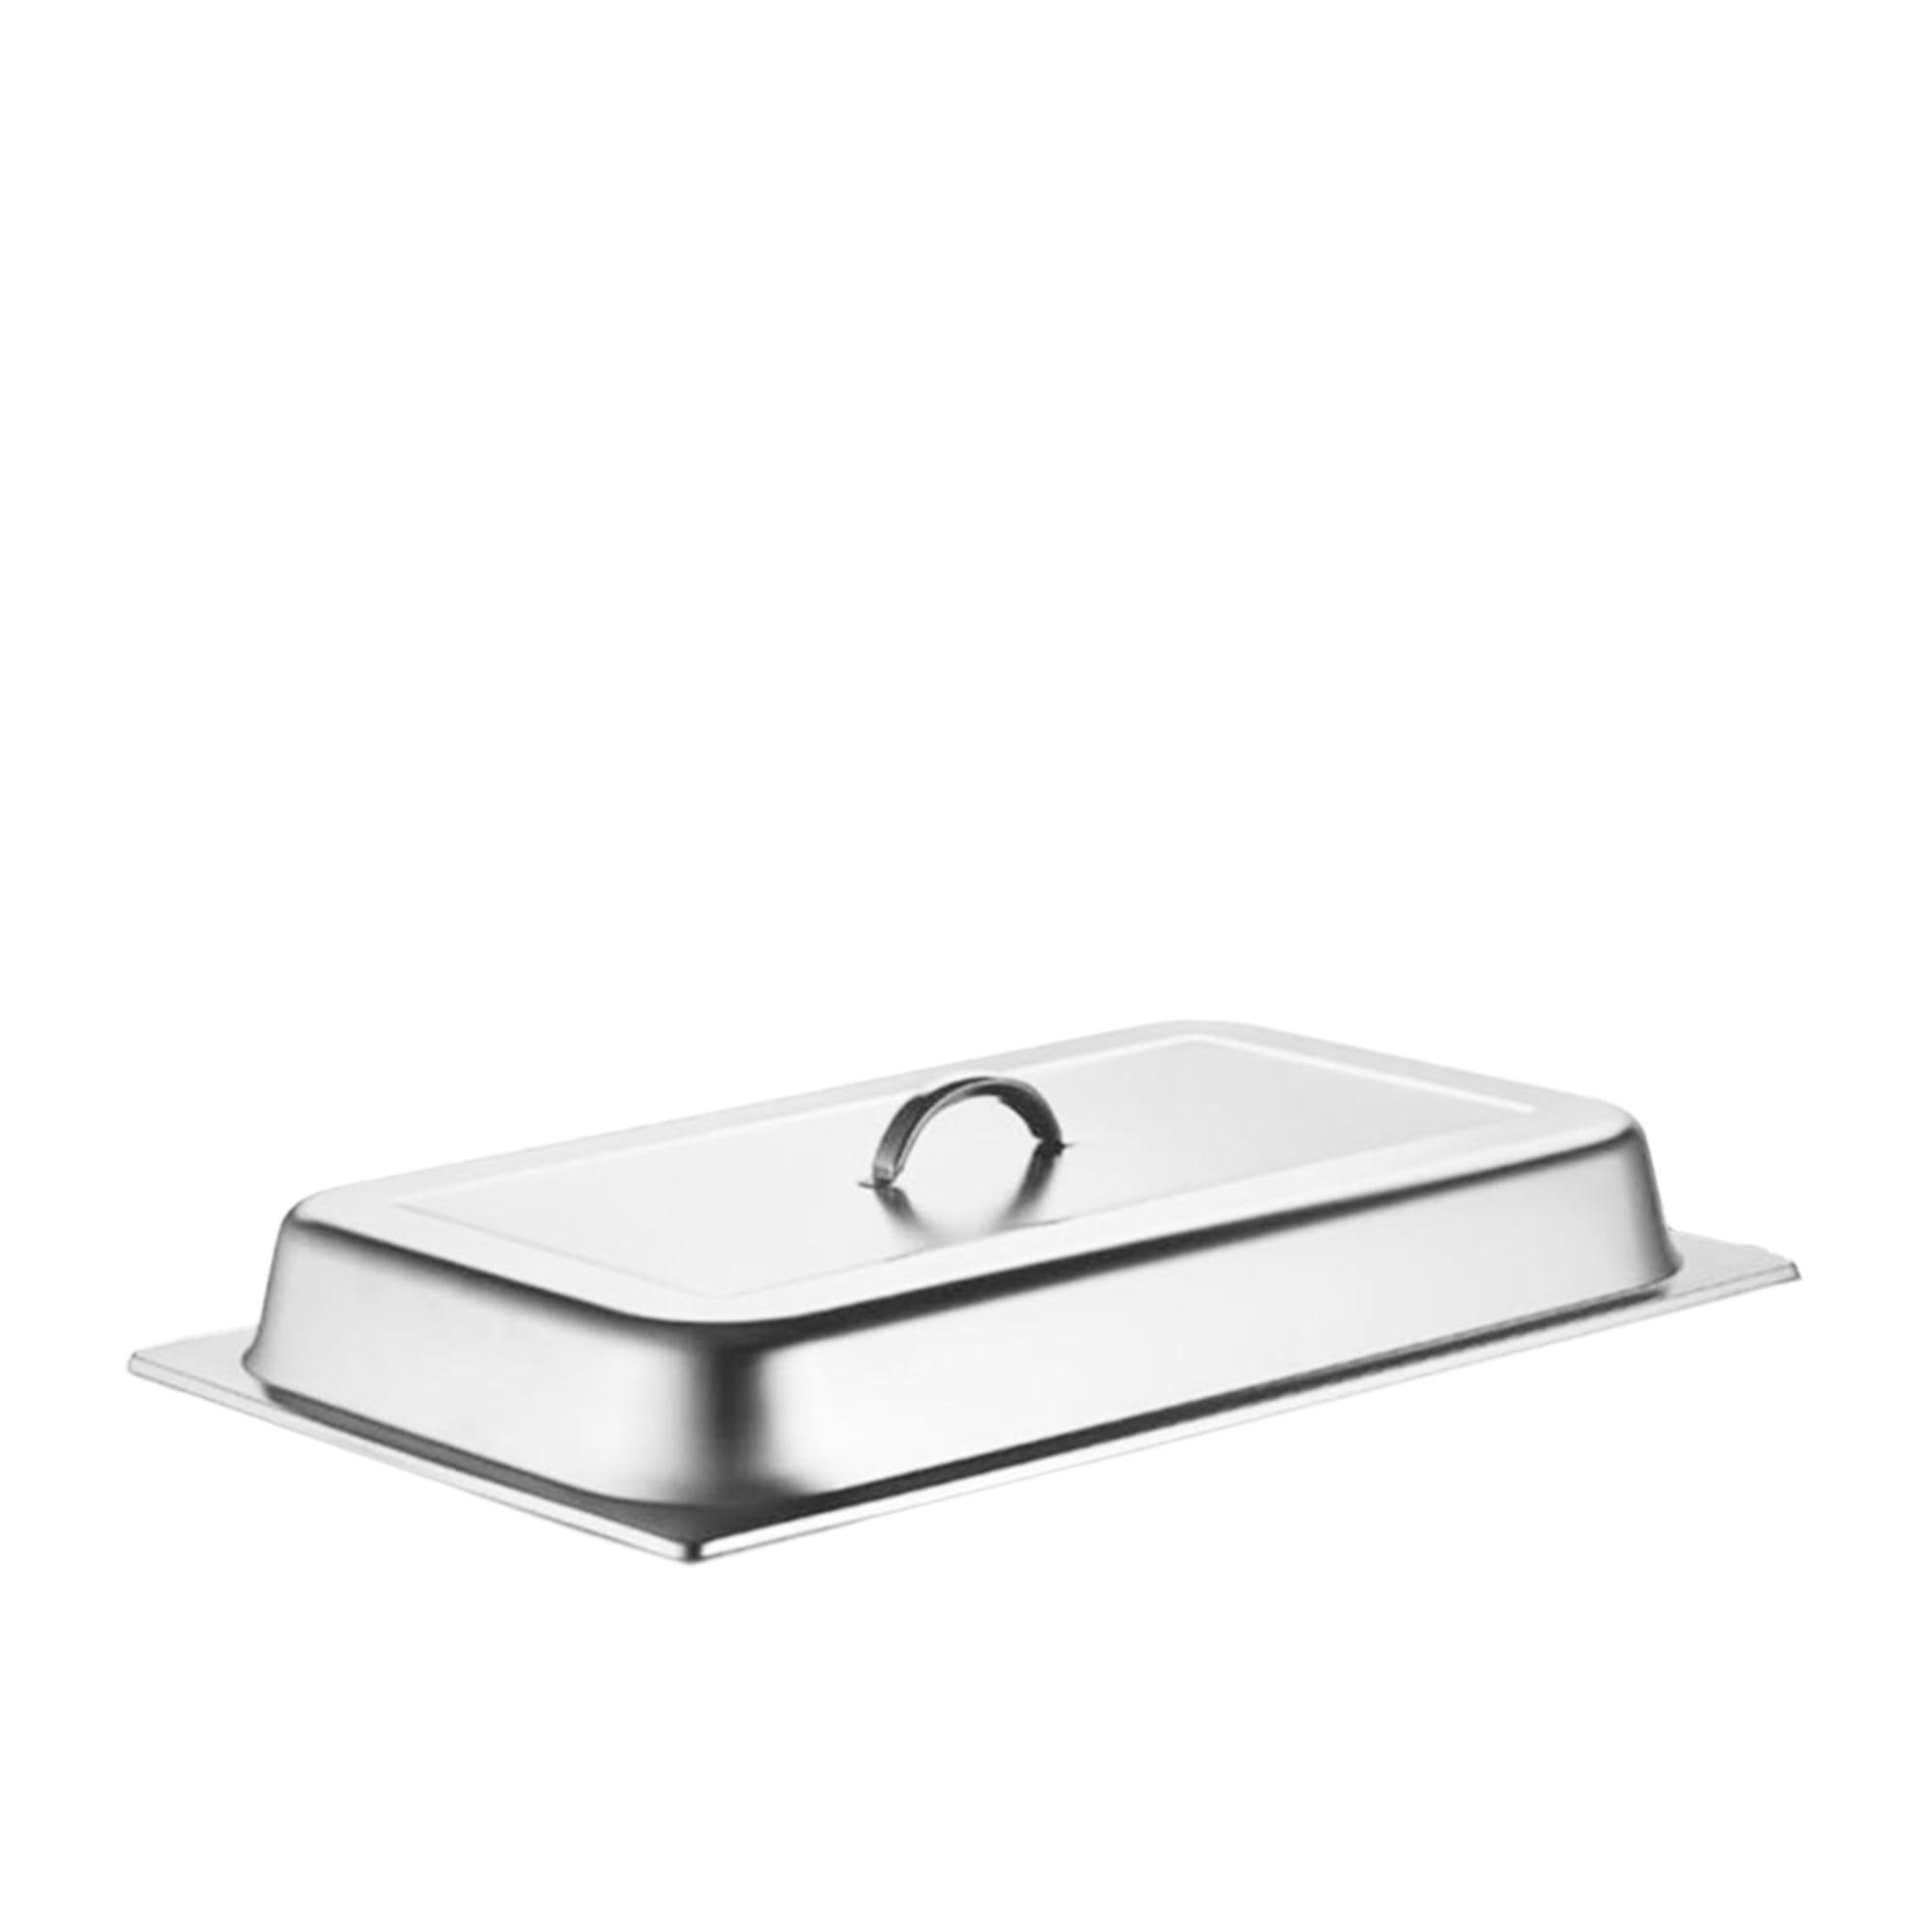 Soga Rectangular Stainless Steel Chafing Dish with Lid Set of 2 Image 3